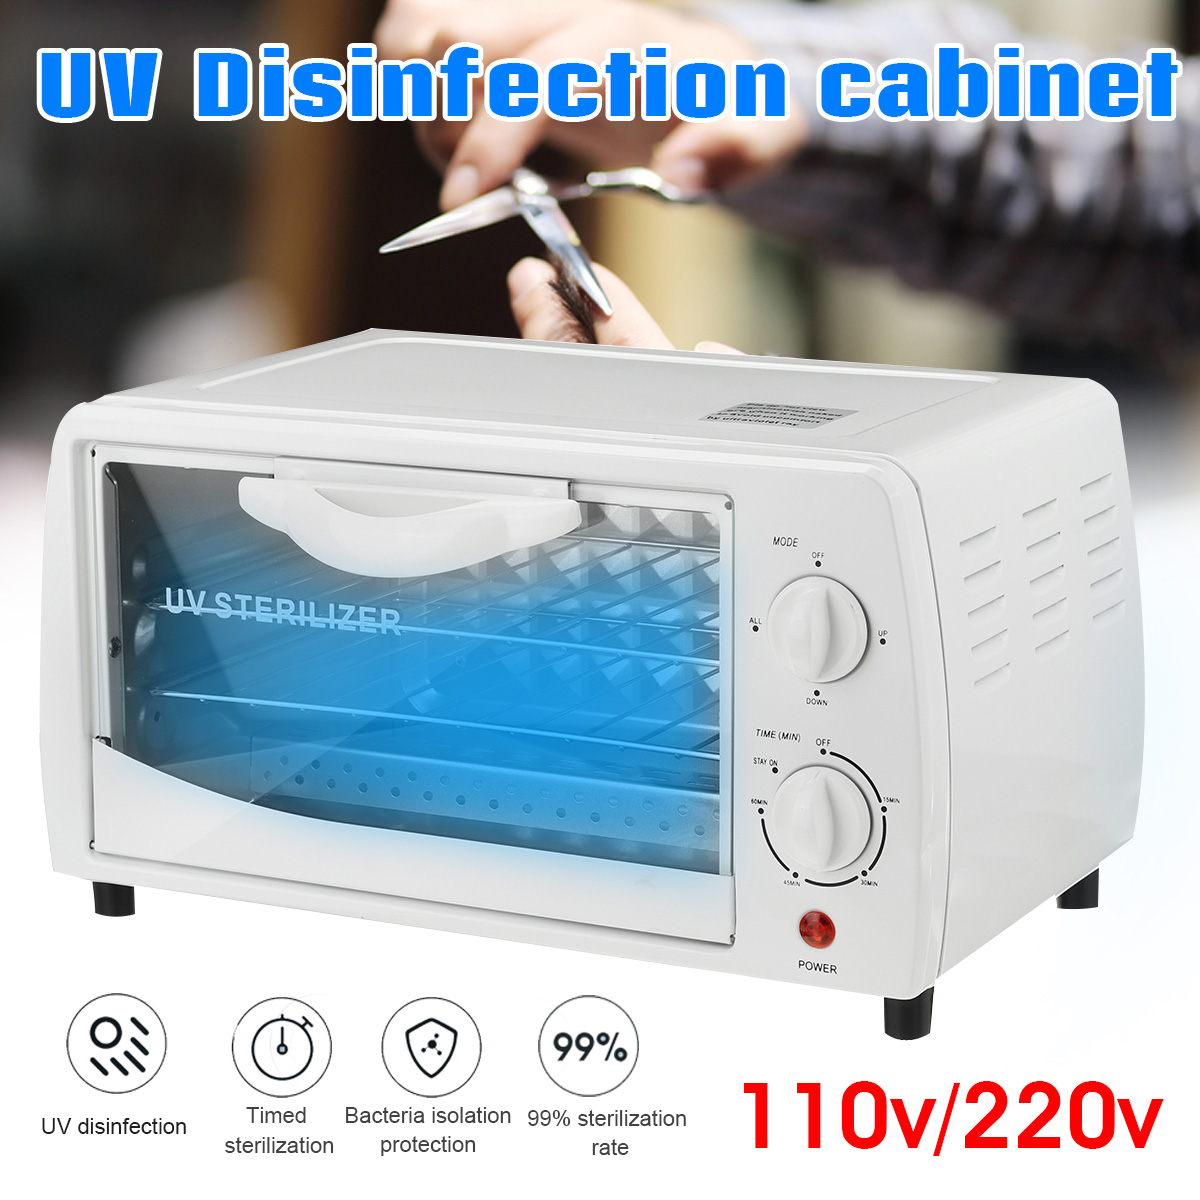 Nail-Art-Tools-LED-Air-Sterilizer-Box-Disinfection-Cabinet-for-Beauty-Manicure-1669603-1